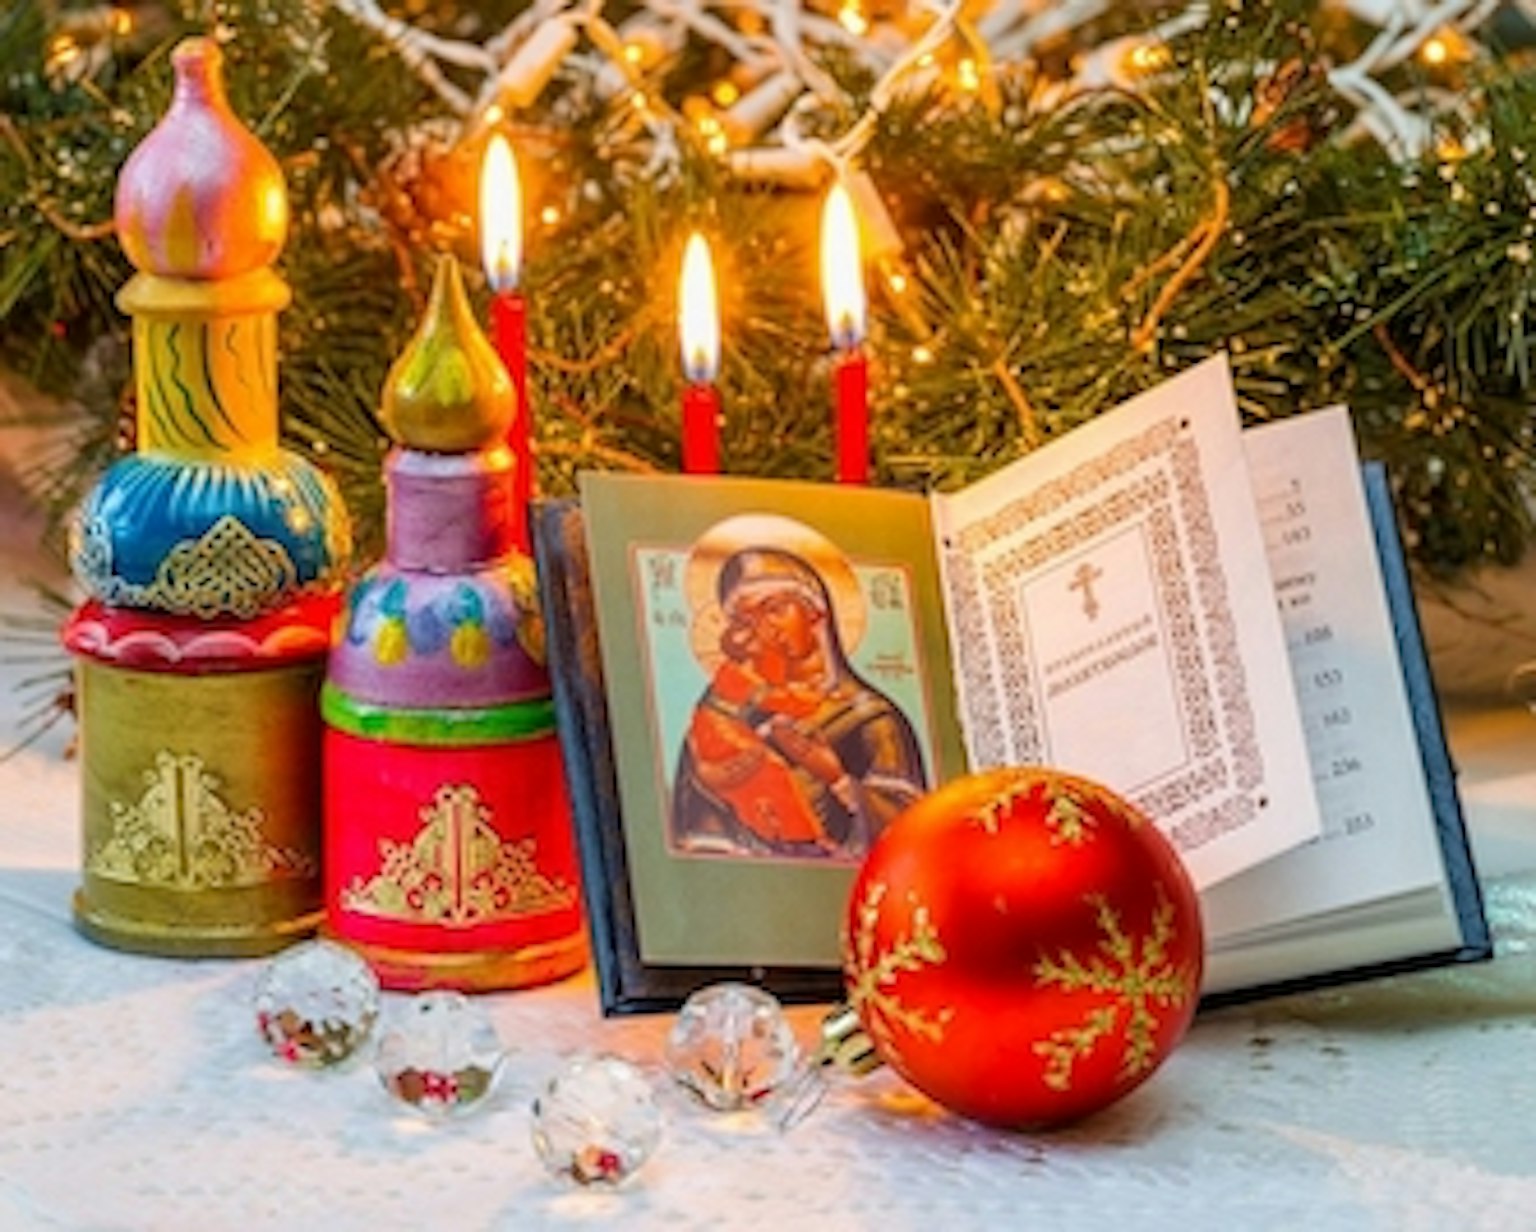 a-quiet-russian-orthodox-christmas-in-hoosier-country-www-splicetoday